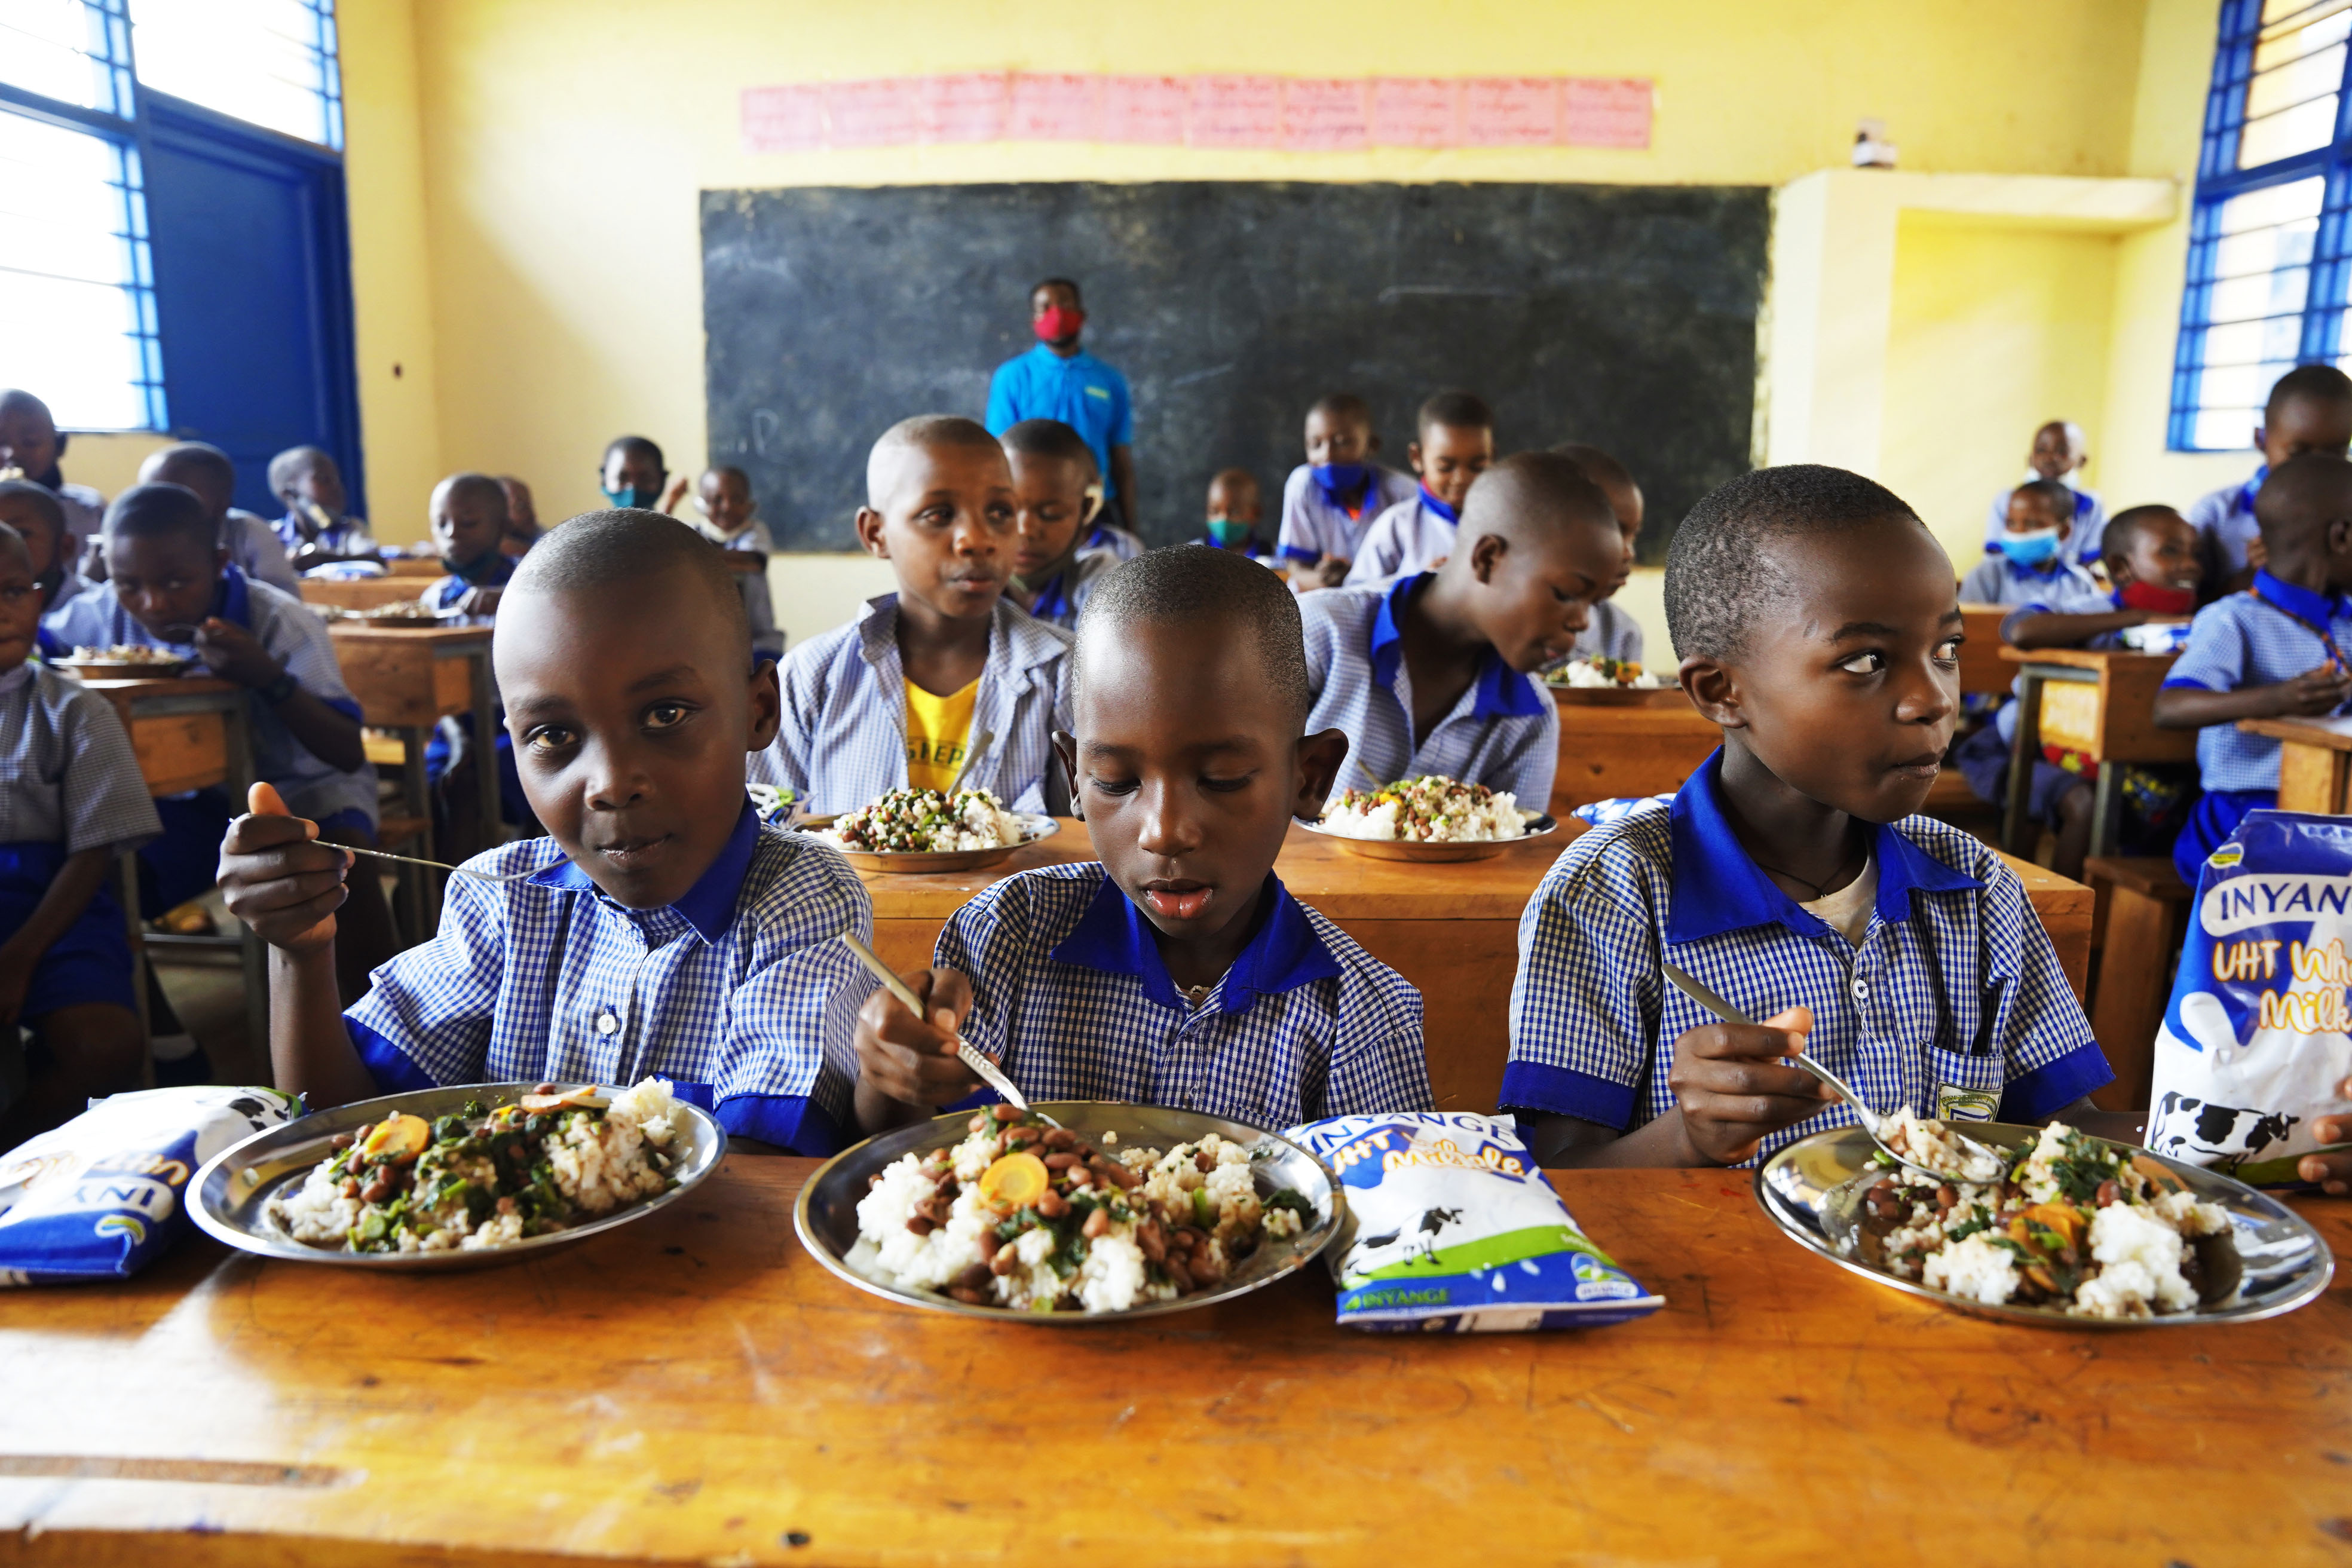 Children have lunch through school feeding program at Masaka Primary School in Kicukiro District on February 28, 2022. According to the statistics the project served meals to about 808,000 children in 979 schools through school feeding programme for initial three months on school reopening. 